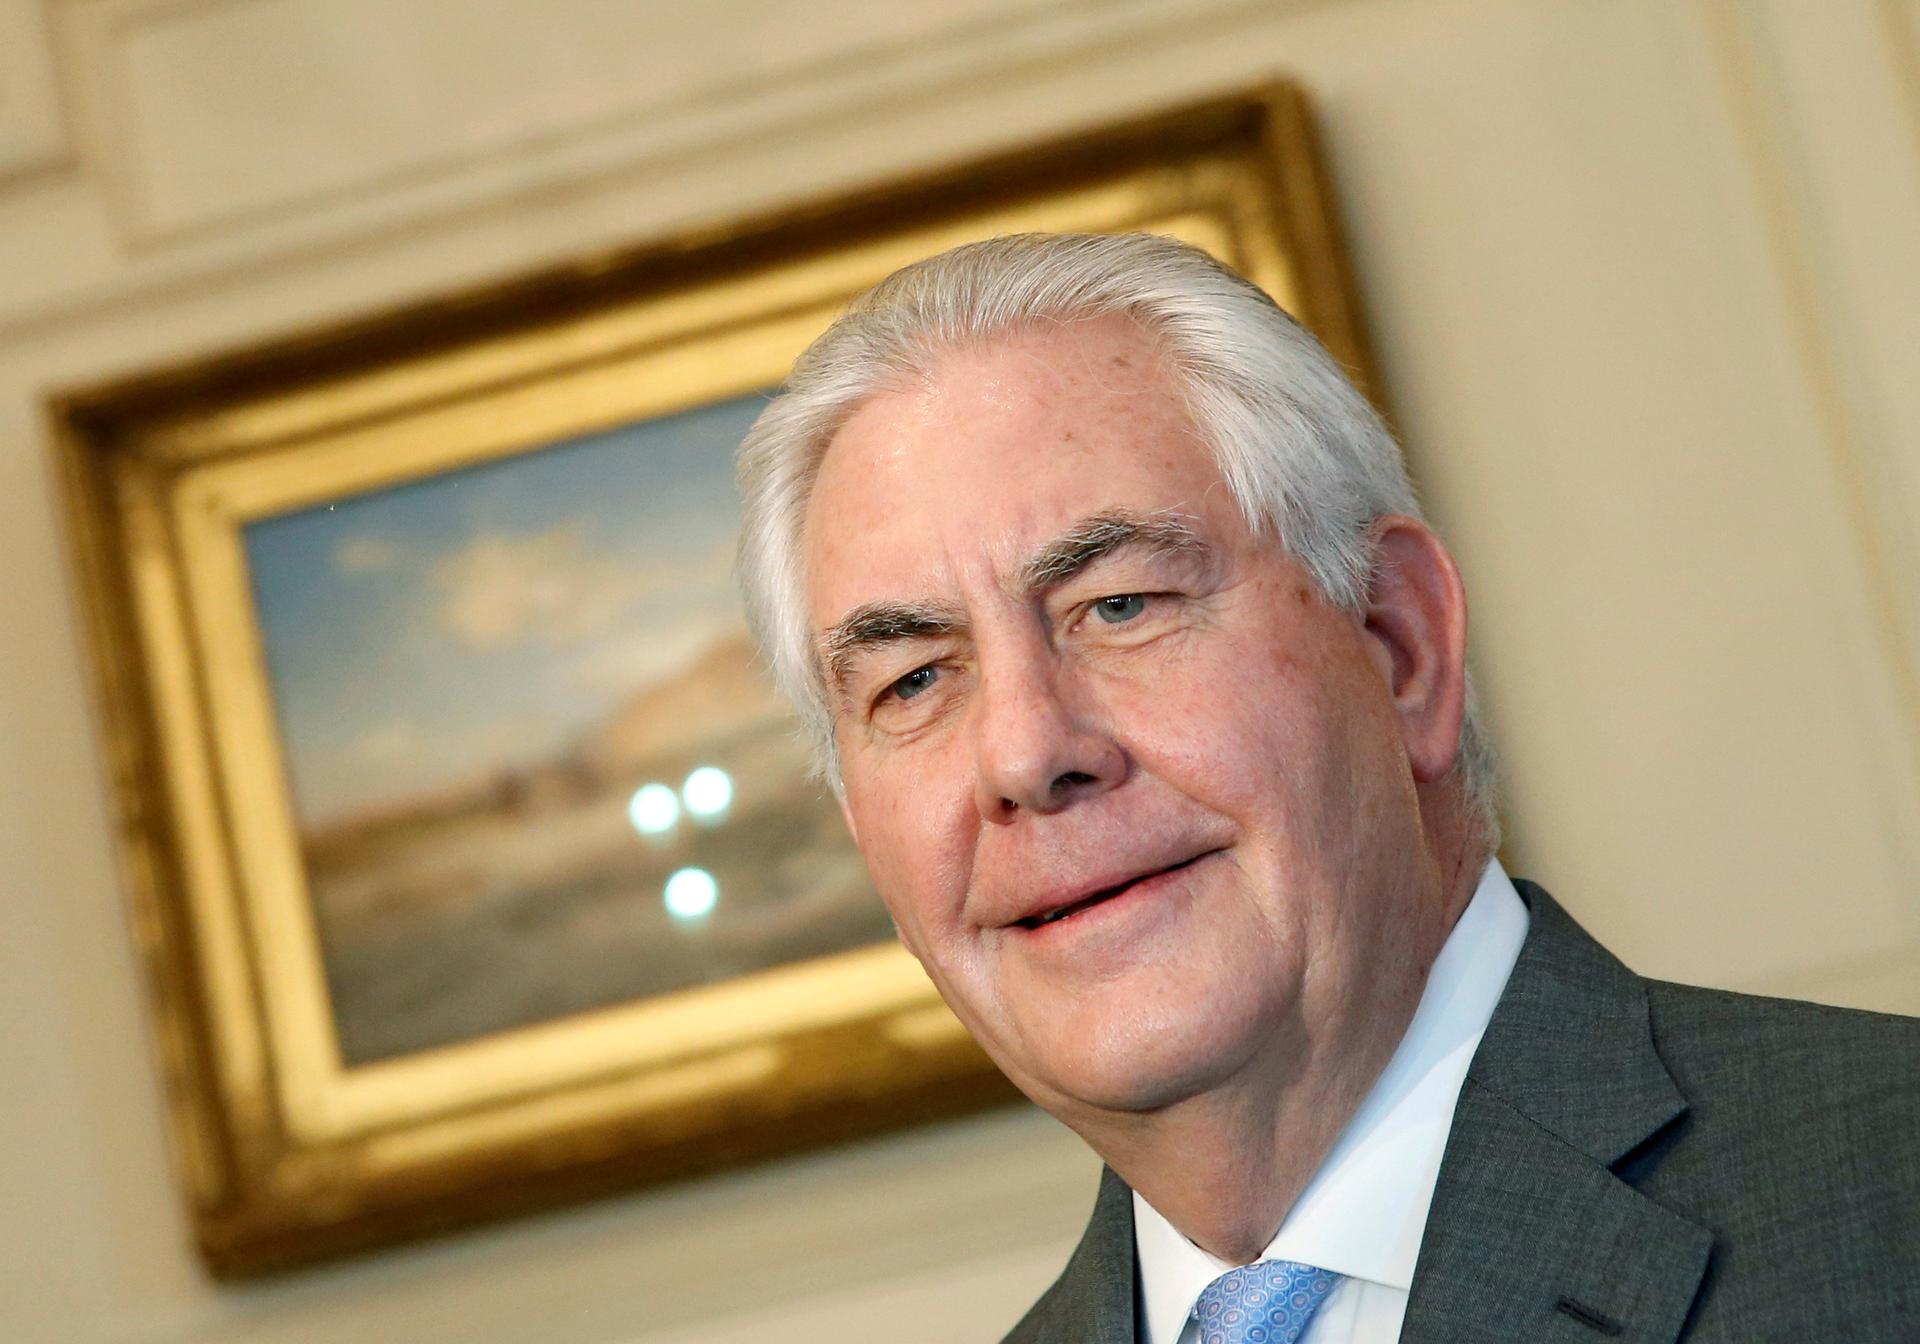 When the State Department issued its annual report on human rights, Secretary of State Rex Tillerson skipped the announcement.